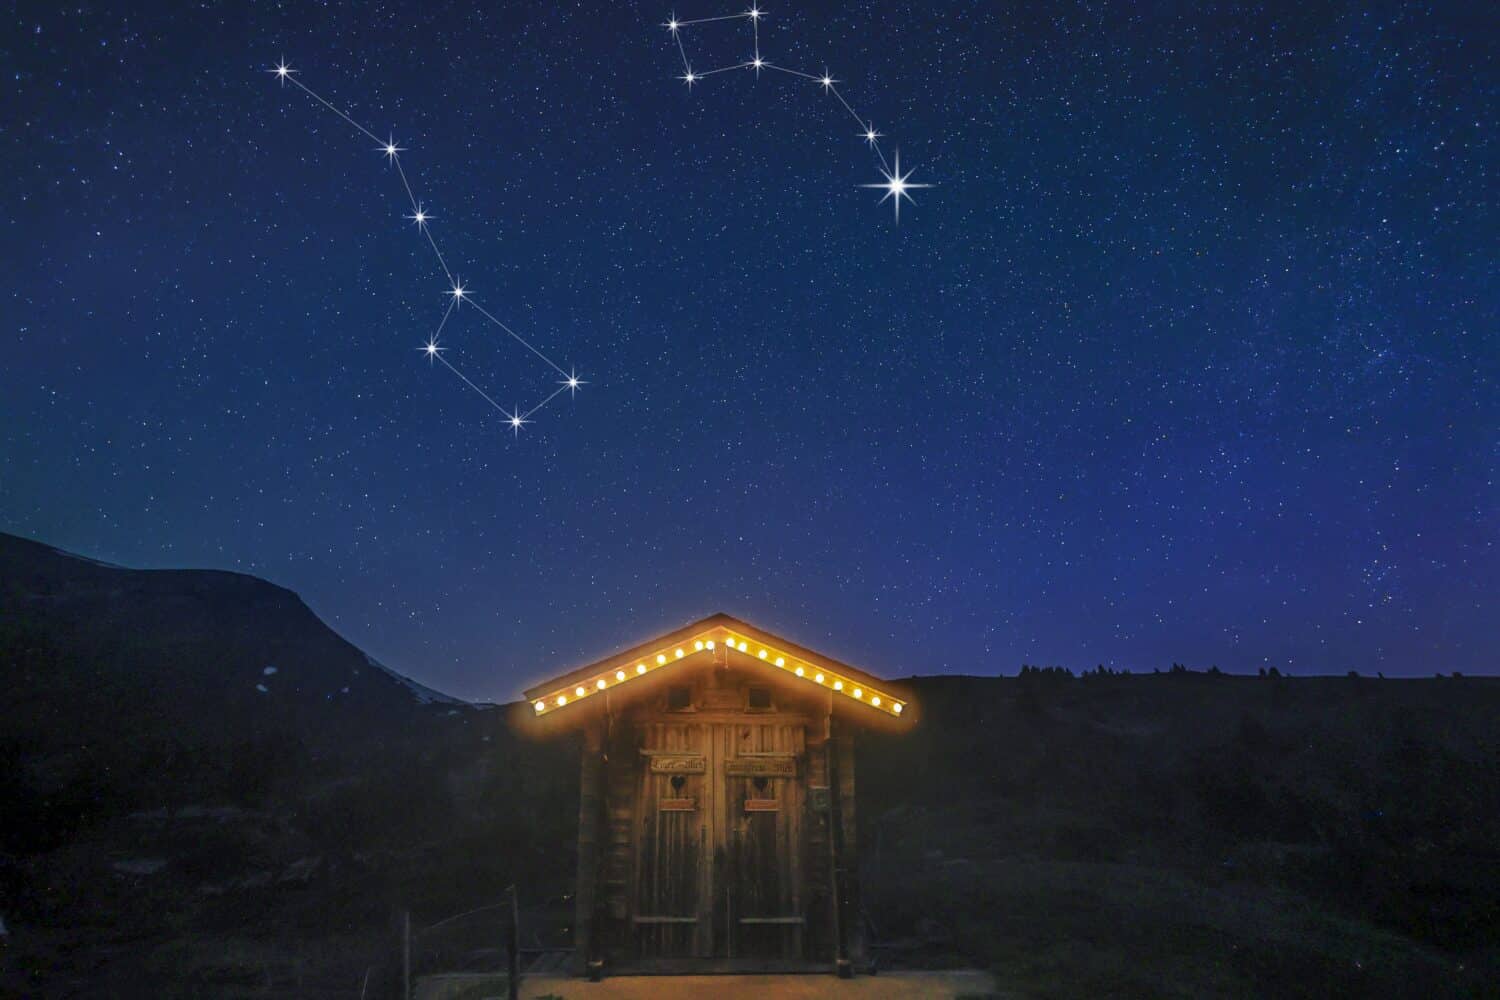 A real night scene on a mountain hut with starry sky showing constellation of great bear and little bear and the North Star